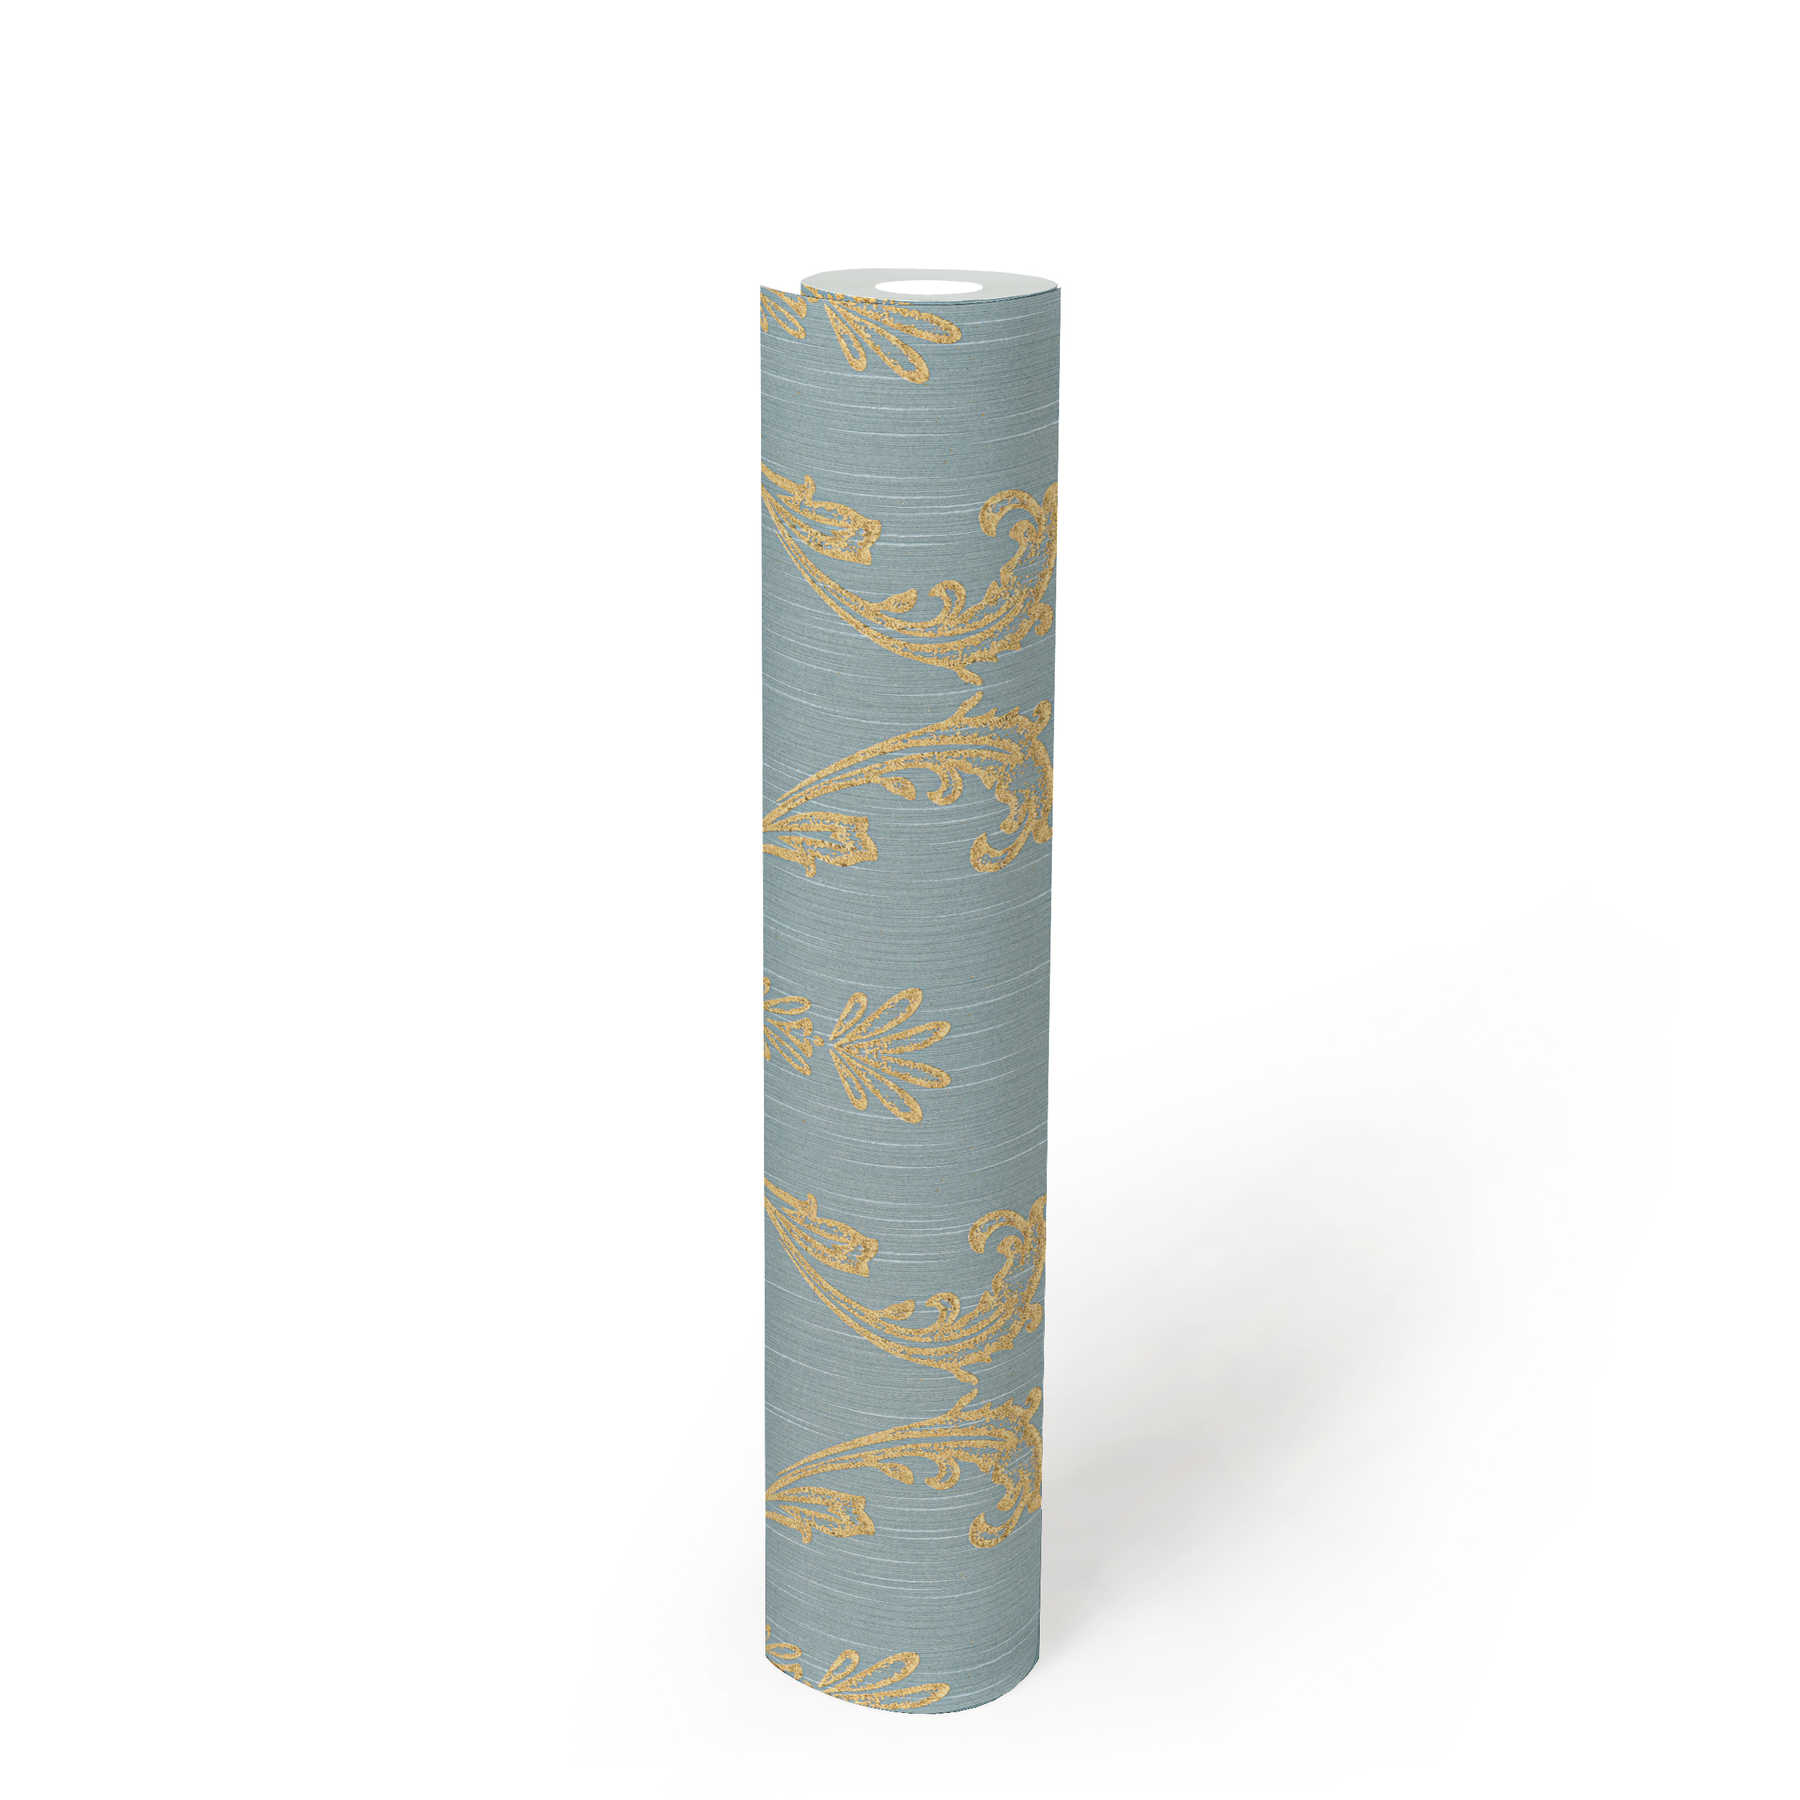             Ornamental wallpaper with floral elements in gold - gold, blue, green
        